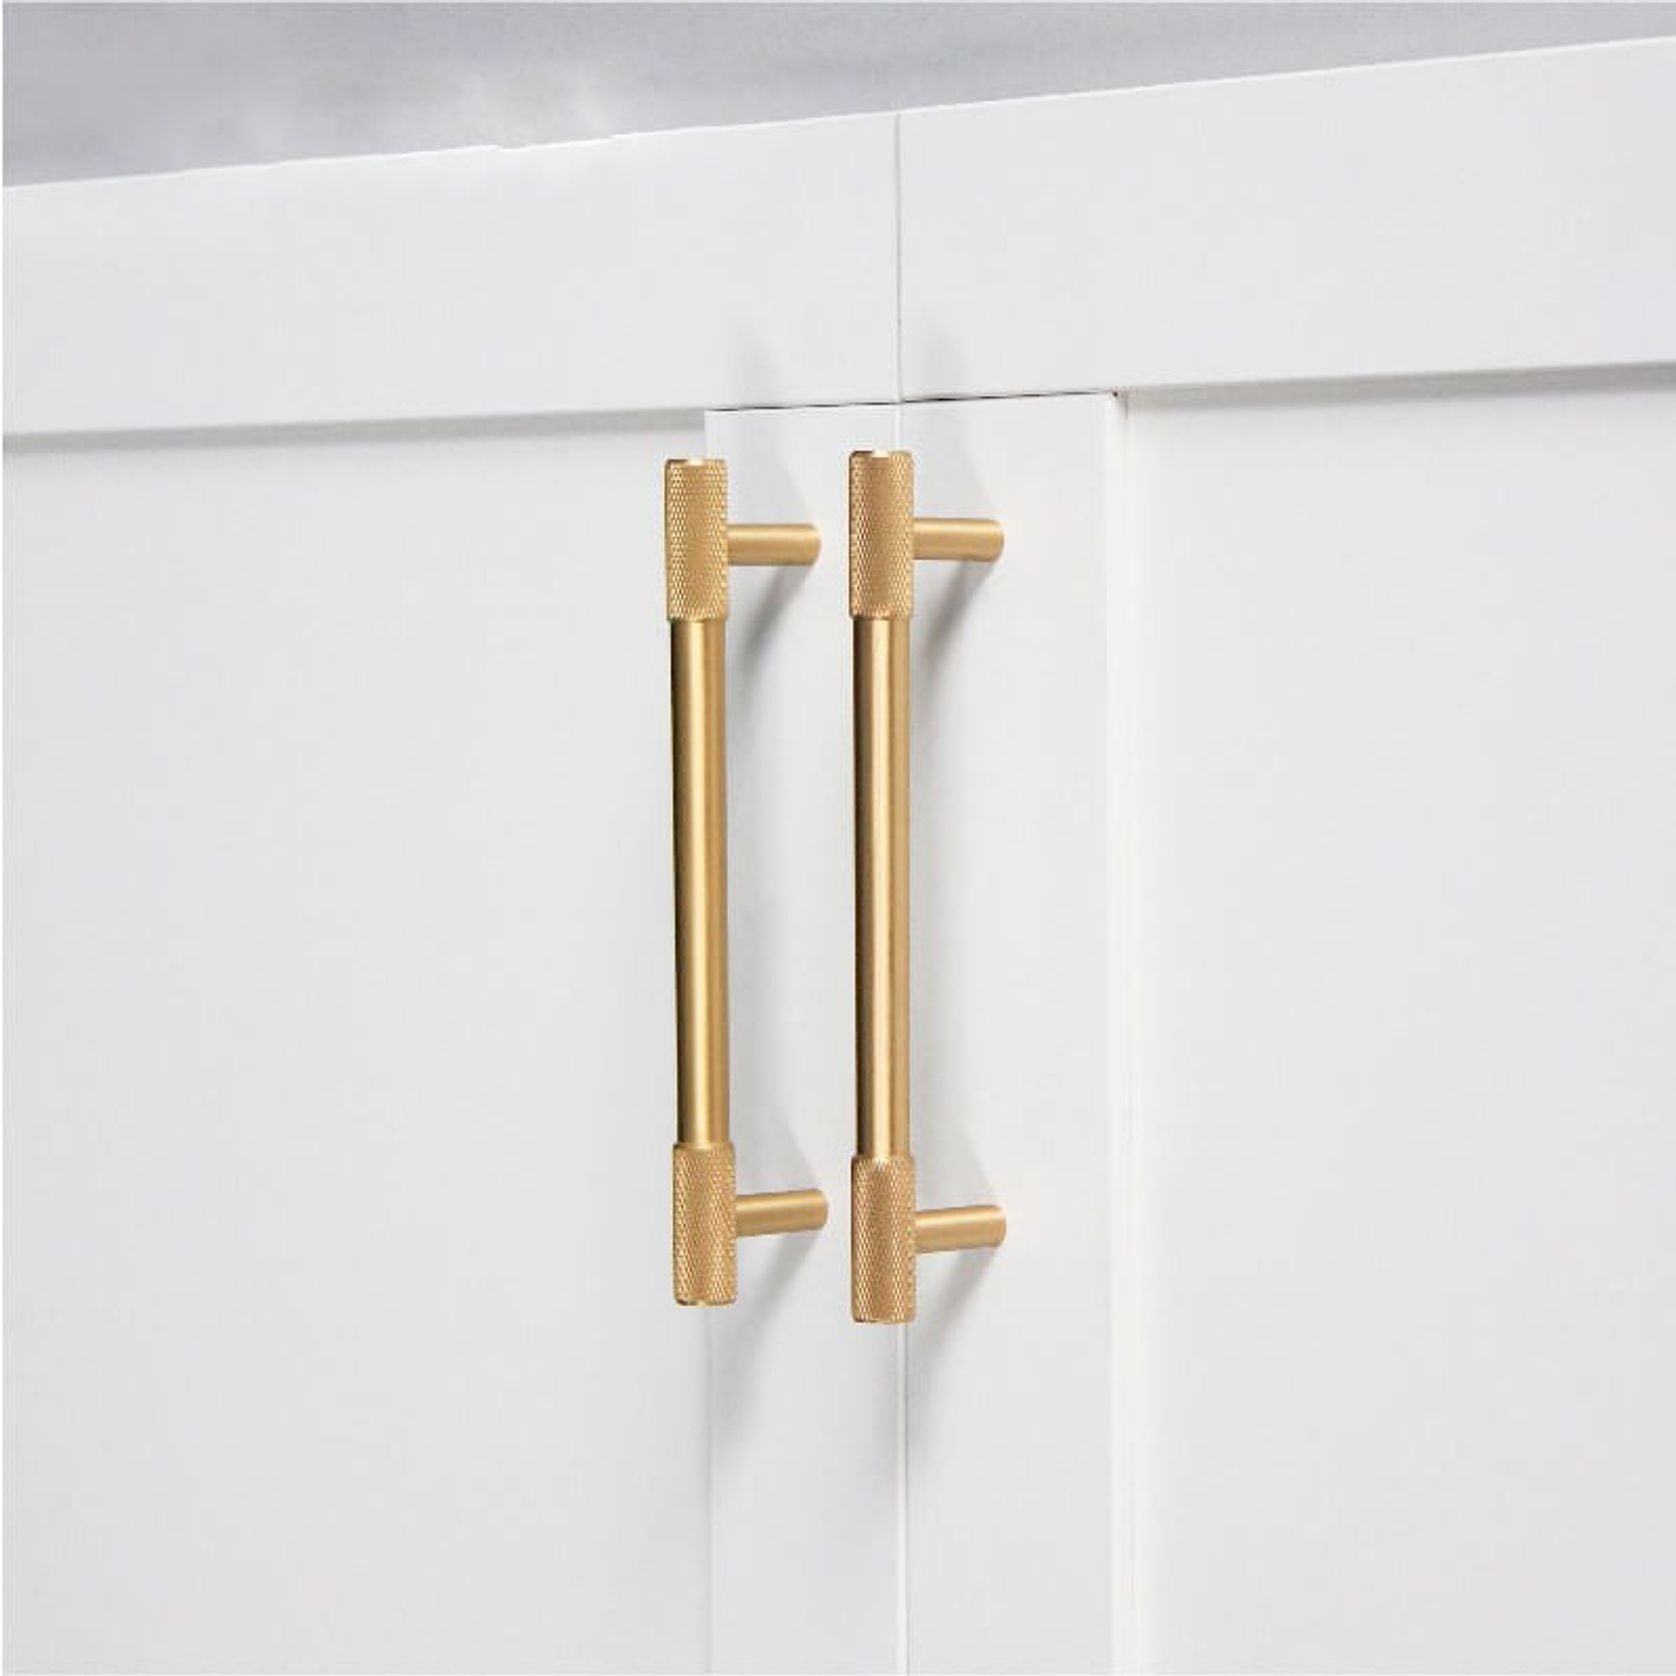 Solid Brass Kitchen Cabinet Handles | Toowoomba gallery detail image